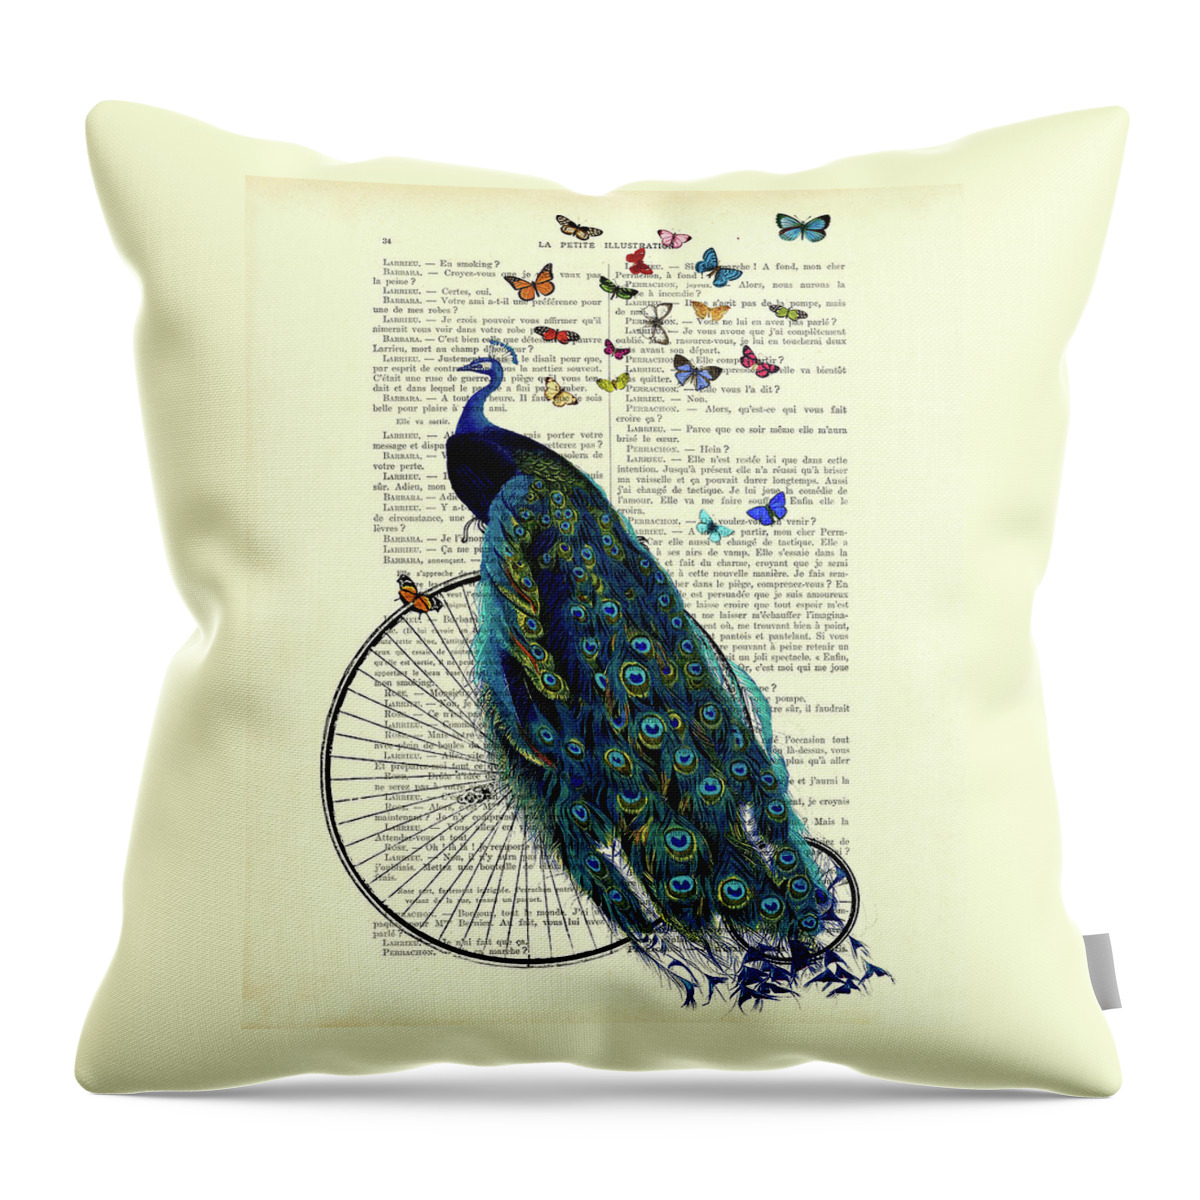 Peacock Throw Pillow featuring the digital art Peacock On Penny Farthing Bike With Butterflies Art Print by Madame Memento